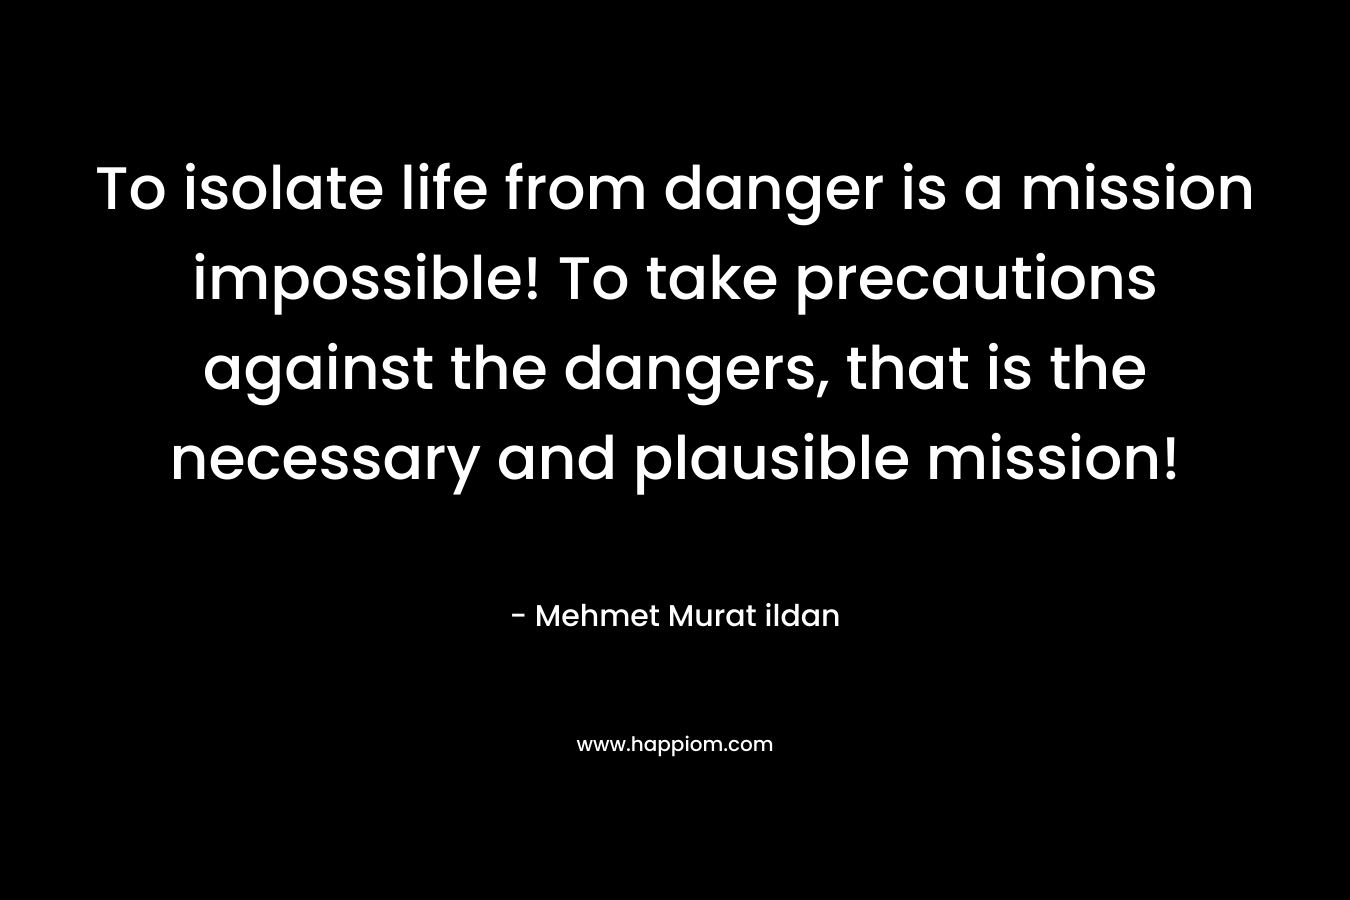 To isolate life from danger is a mission impossible! To take precautions against the dangers, that is the necessary and plausible mission! – Mehmet Murat ildan